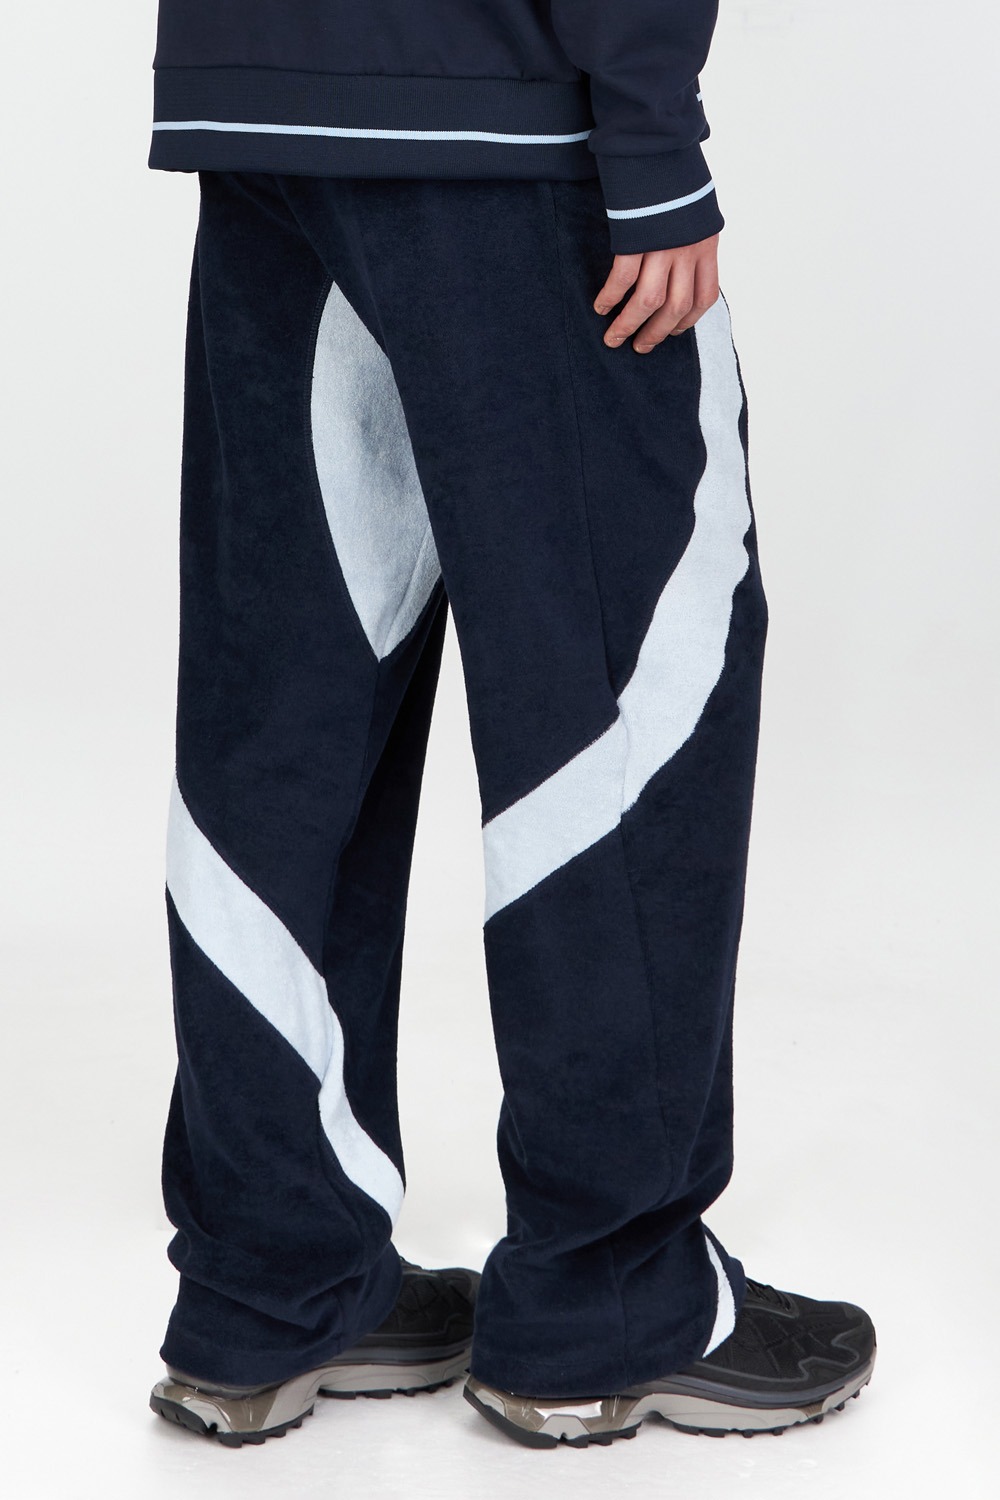 Towelling Panel Pant_Navy